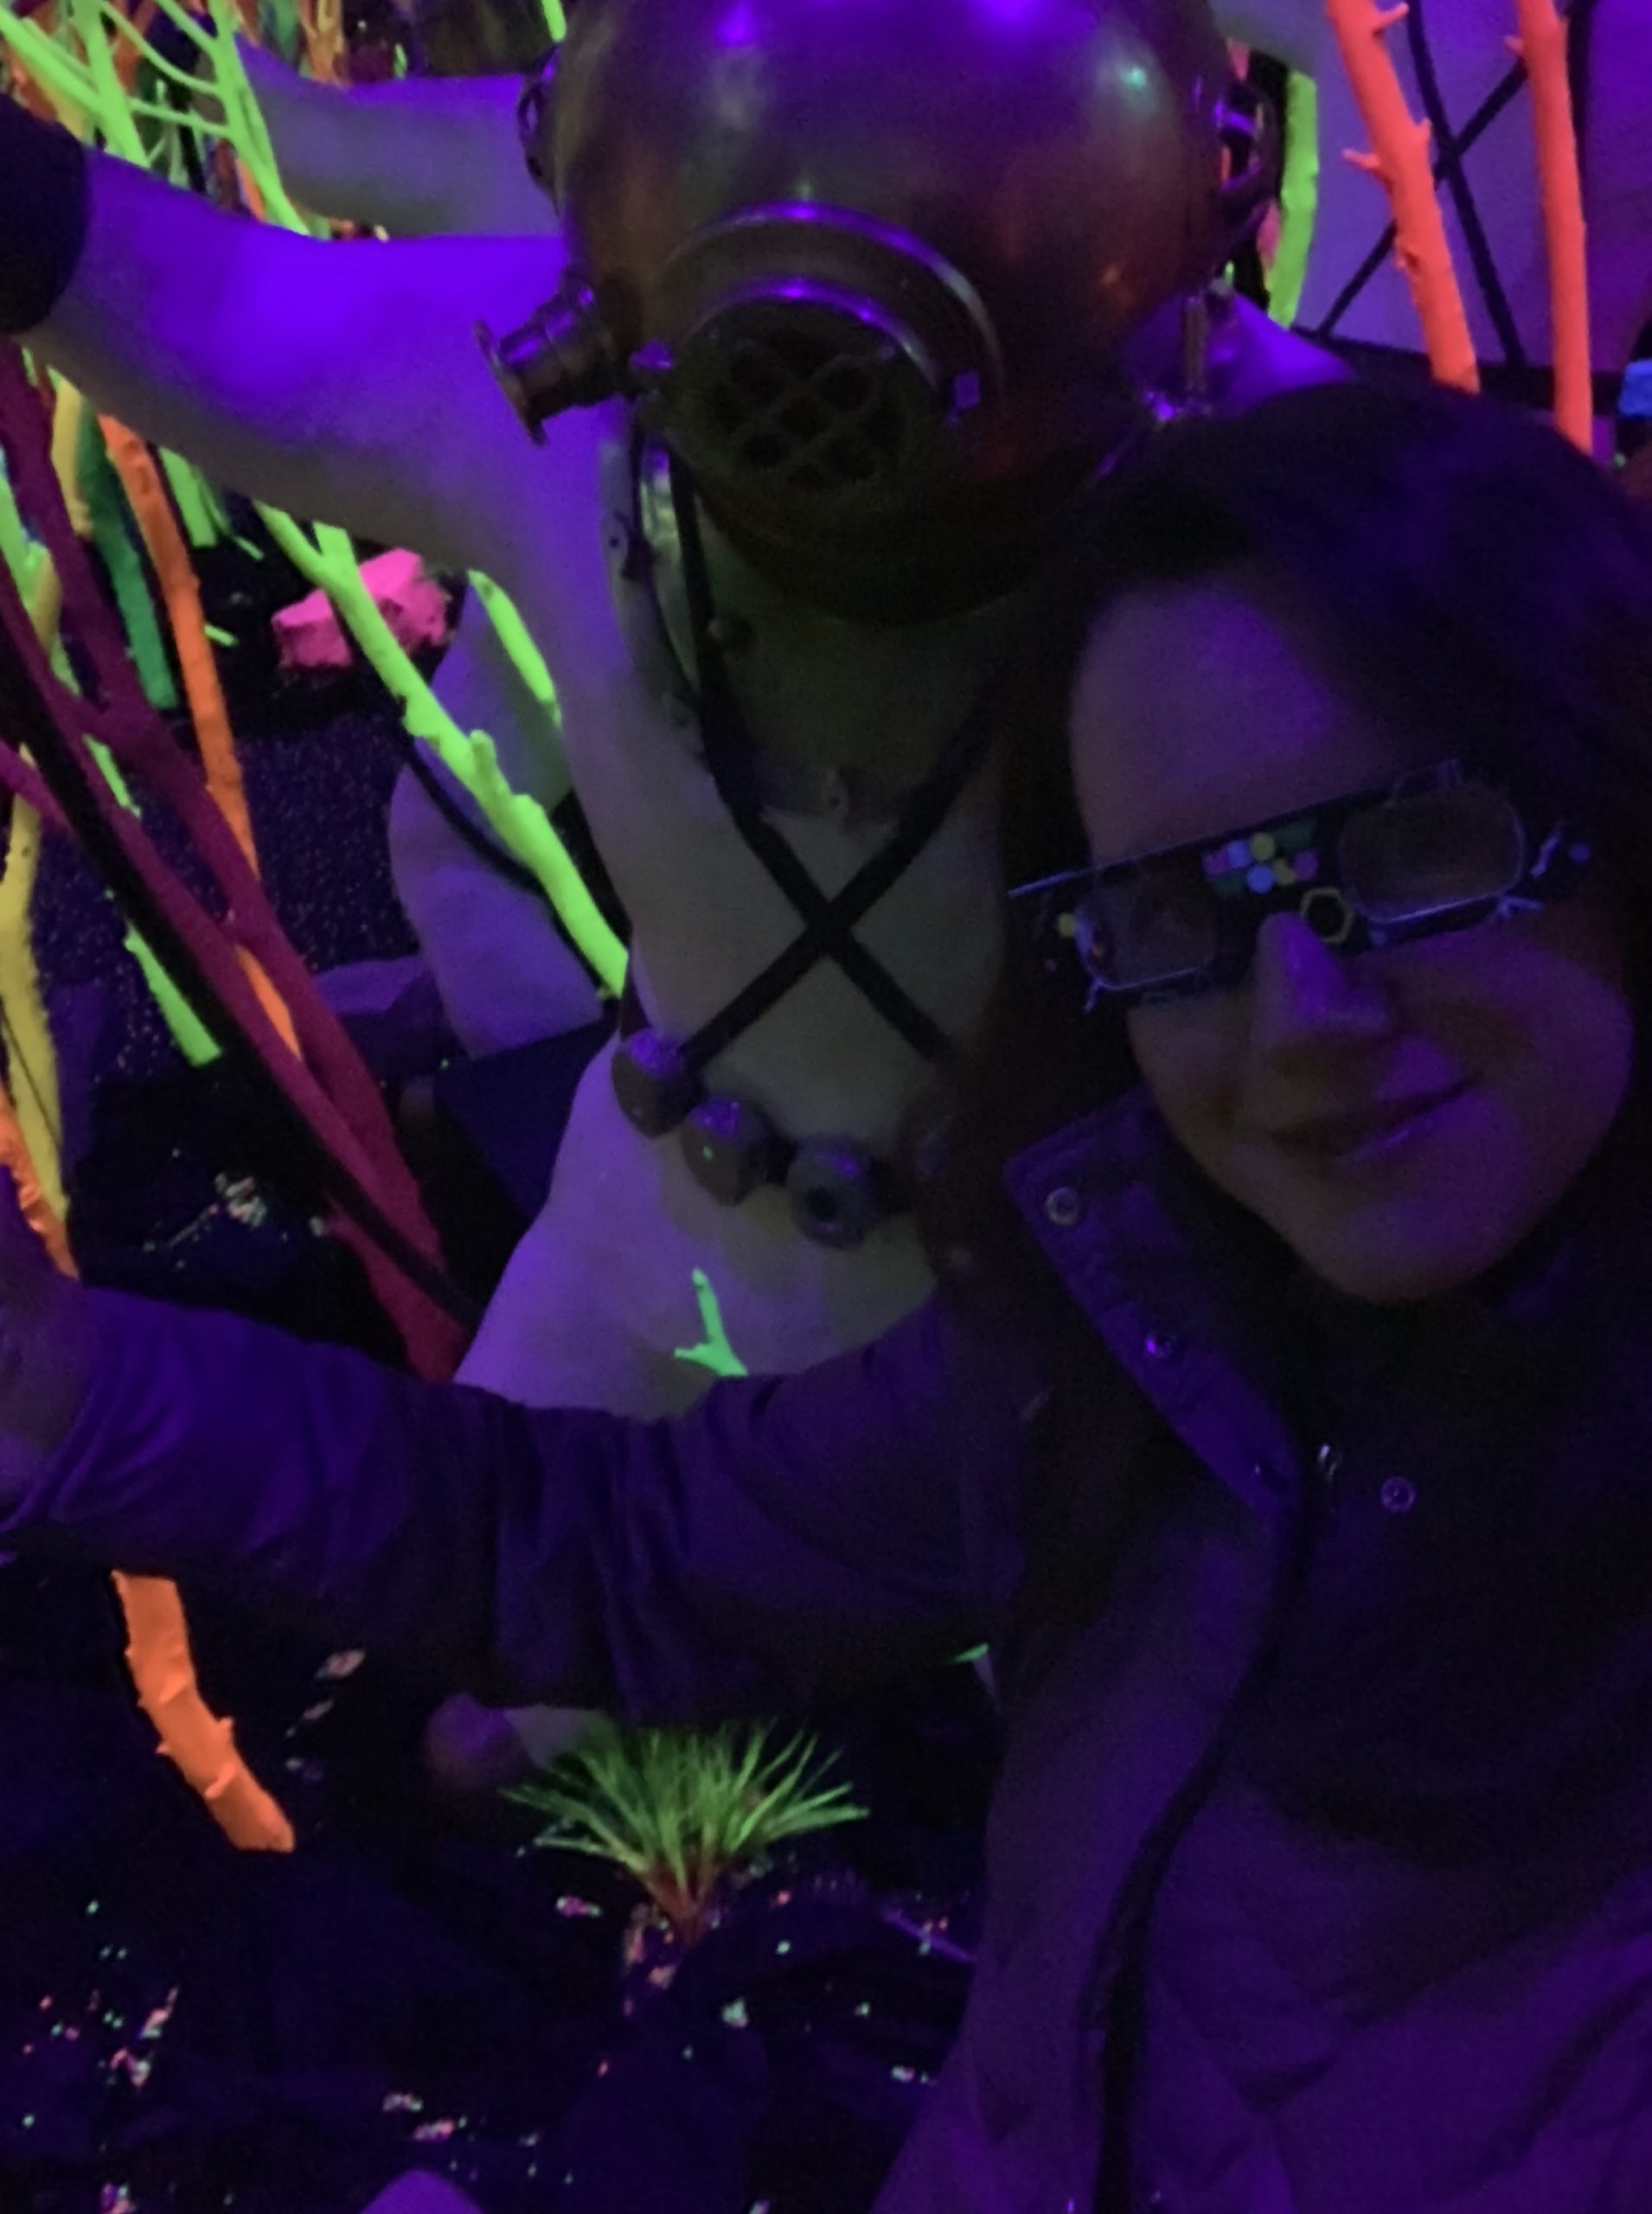 The Time at Meow Wolf in Santa Fe